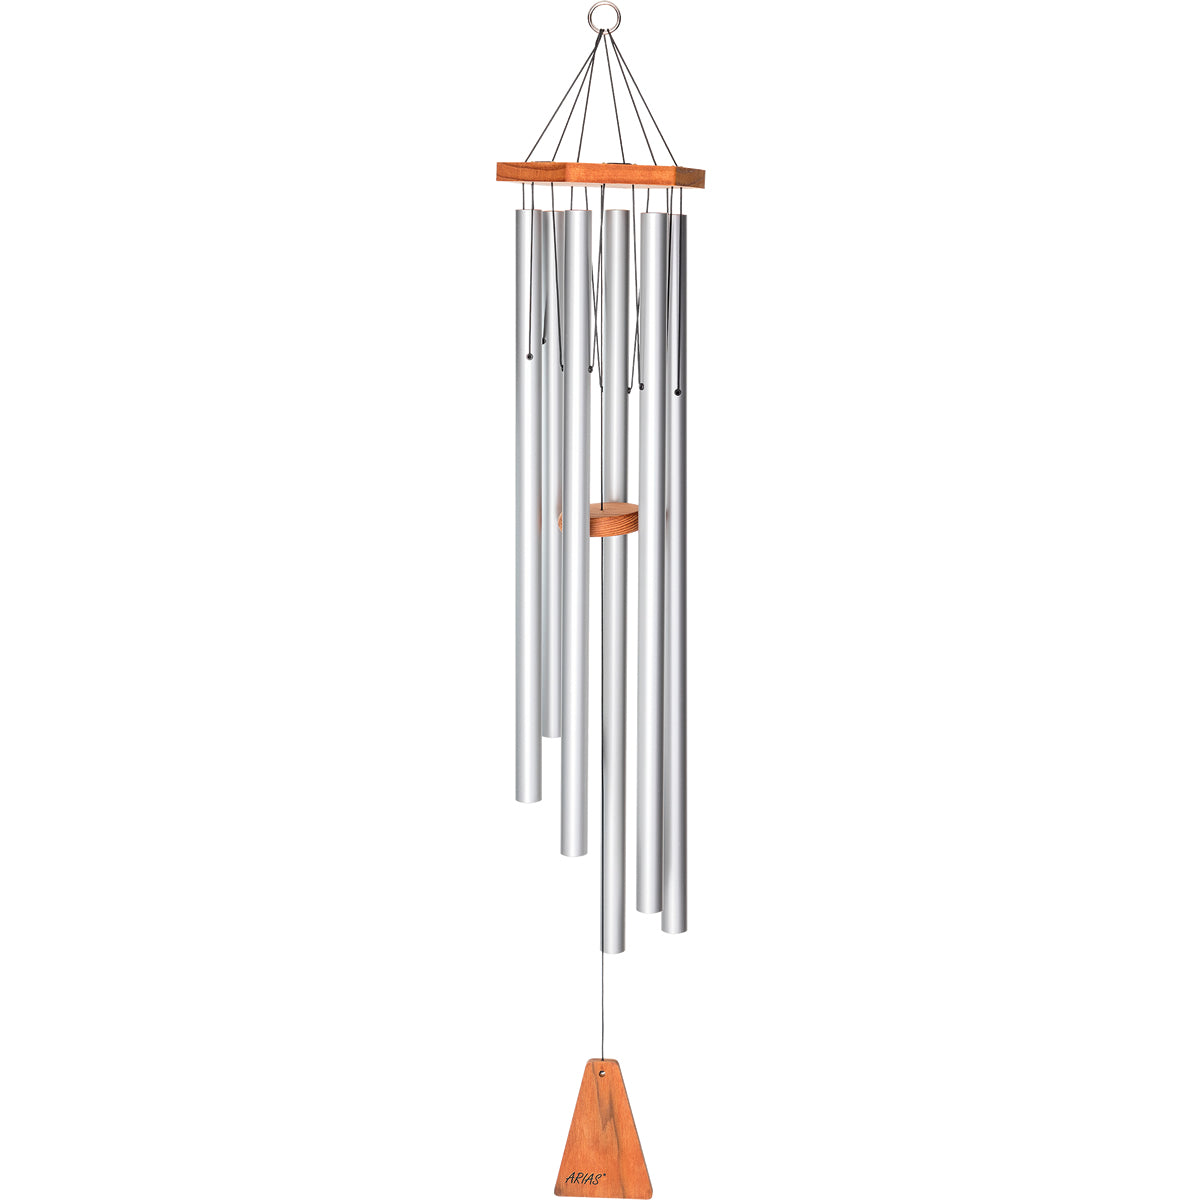 Arias 44-inch Wind Chime - Satin Silver Finish Tubes